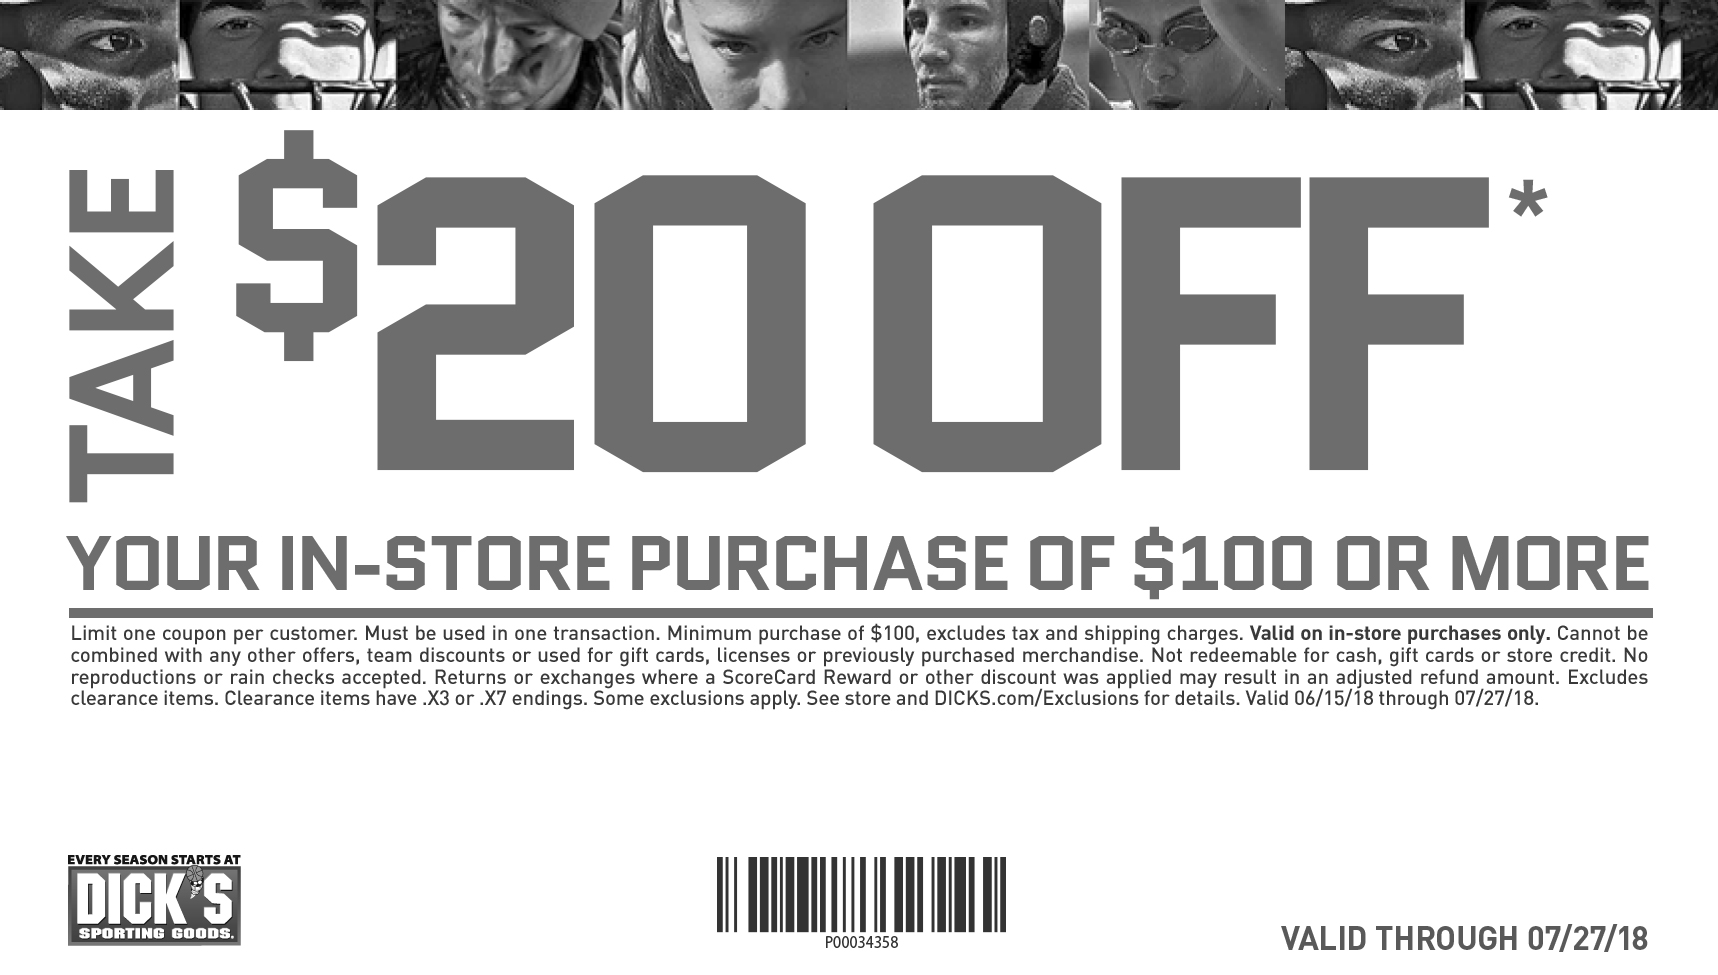 Limit one coupon per customer. Minimum purchase of $100 before sales tax. 
					Total amount of coupon must be redeemed at one time. Cannot be combined with any other offers, coupons, team discounts or Guaranteed In-Stock markdown, or used for 
					licenses or previously purchased merchandise. Coupon valid on in-store purchases only. Not redeemable for cash, gift cards or store credit. No reproductions or 
					rain checks accepted. Returns or exchanges where a ScoreCard Reward or other discount was applied may result in an adjusted refund amount. Excludes firearms, 
					ammunition, Shimano, St. Croix, G. Loomis, Eureka!, Gregory, Hurley, O’Neill, Diamondback, Under Armour (except footwear), The North Face, Patagonia, select 
					Nike tennis apparel, Nike Pro Combat, Nike Legend tee, Jordan, Nike Air Pegasus +30, select Asics footwear, Brooks and Mizuno footwear, Ugg Australia, Burton, 
					Marmot, Spyder, Columbia, Quiksilver, Roxy, Billabong, NFL jerseys, Volcom, Babolat, PING, Titleist, Mizuno Golf, and select FootJoy, Callaway, Cleveland, Odyssey, 
					Cobra, Nike Golf, TaylorMade, select golf footwear, championship merchandise, all bats 194.99 or more, all ball gloves 169.99 or more, Bauer Hockey, Easton 
					Sports- D370 Hockey, FoxPro, Reebok CCM / Reebok Hockey, Mission Roller Hockey, Simms, Thule, Van Staal and Yakima. Some additional exclusions may apply. 
					See store for details